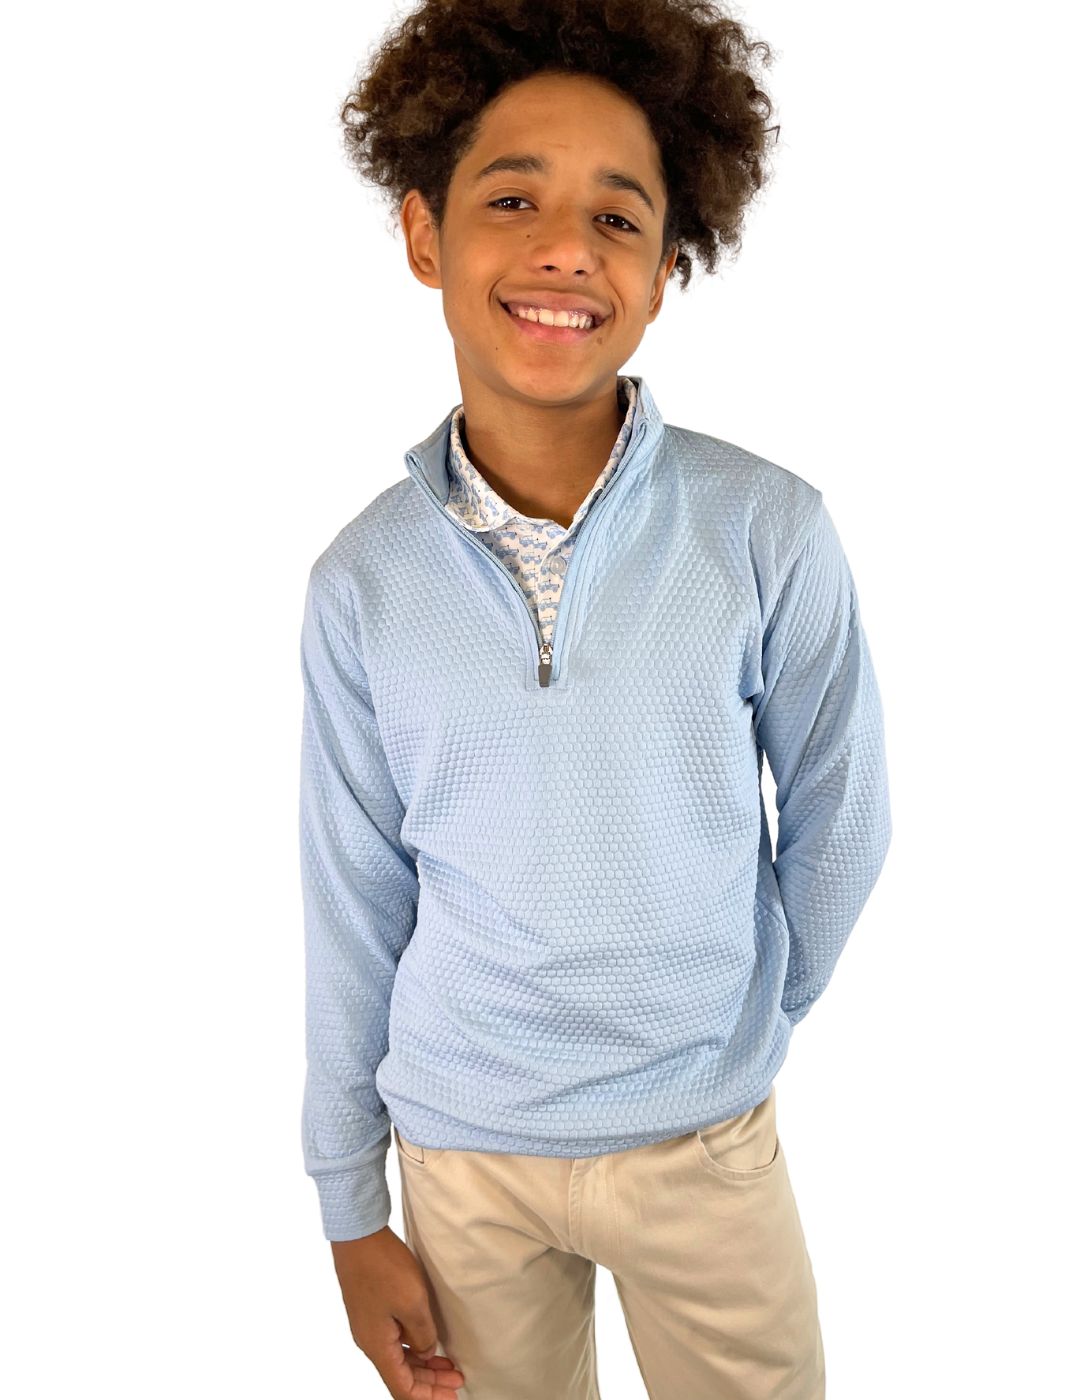 Cam Youth Boys' Pullover